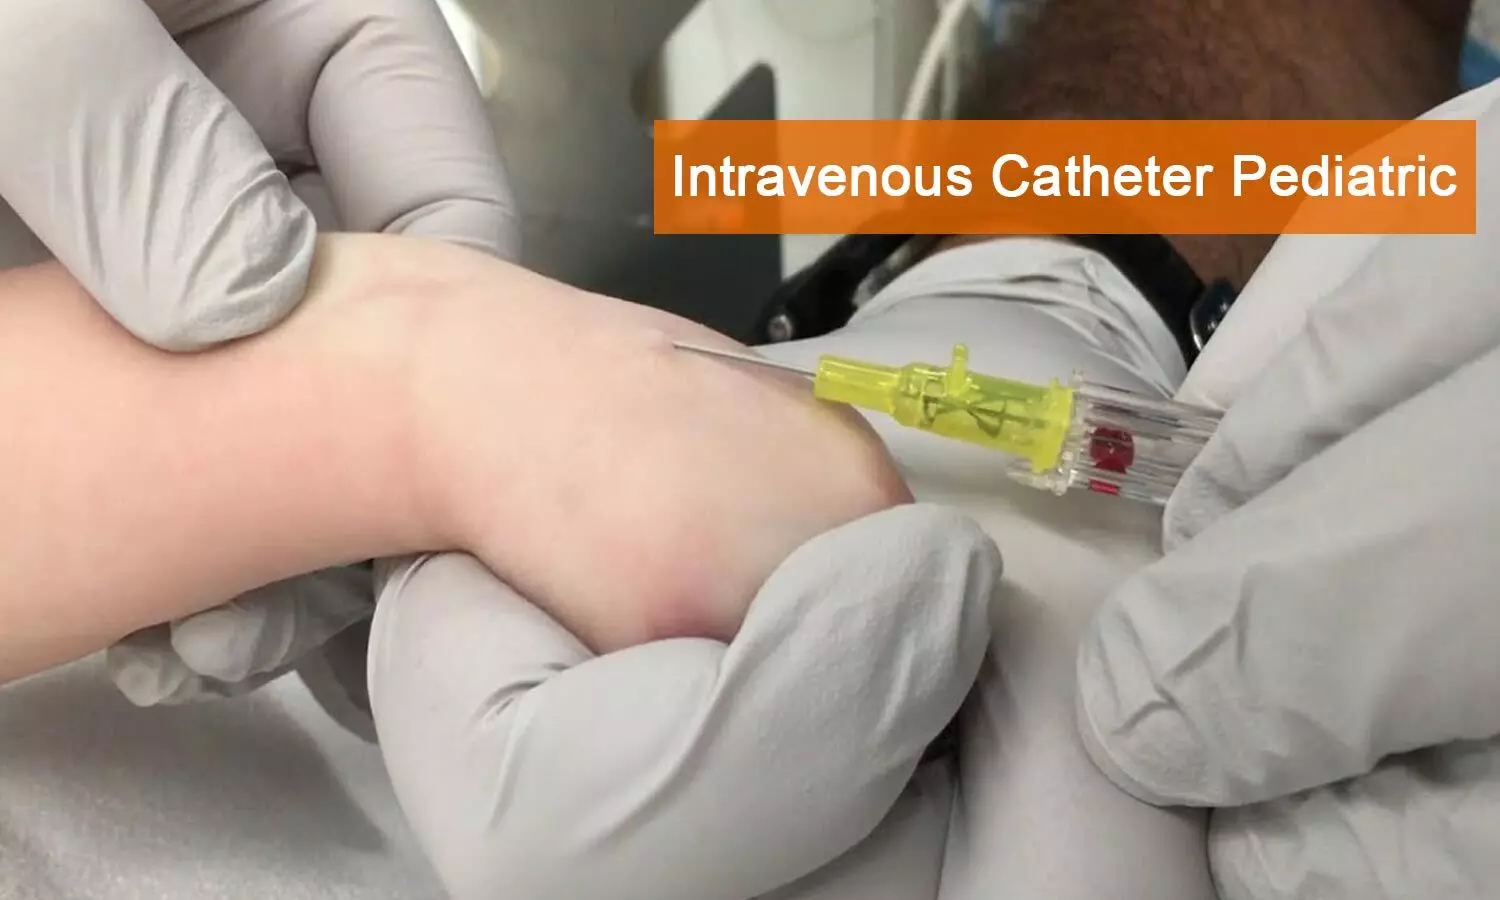 New Guidance for intravenous catheter selection in Pediatrics  released